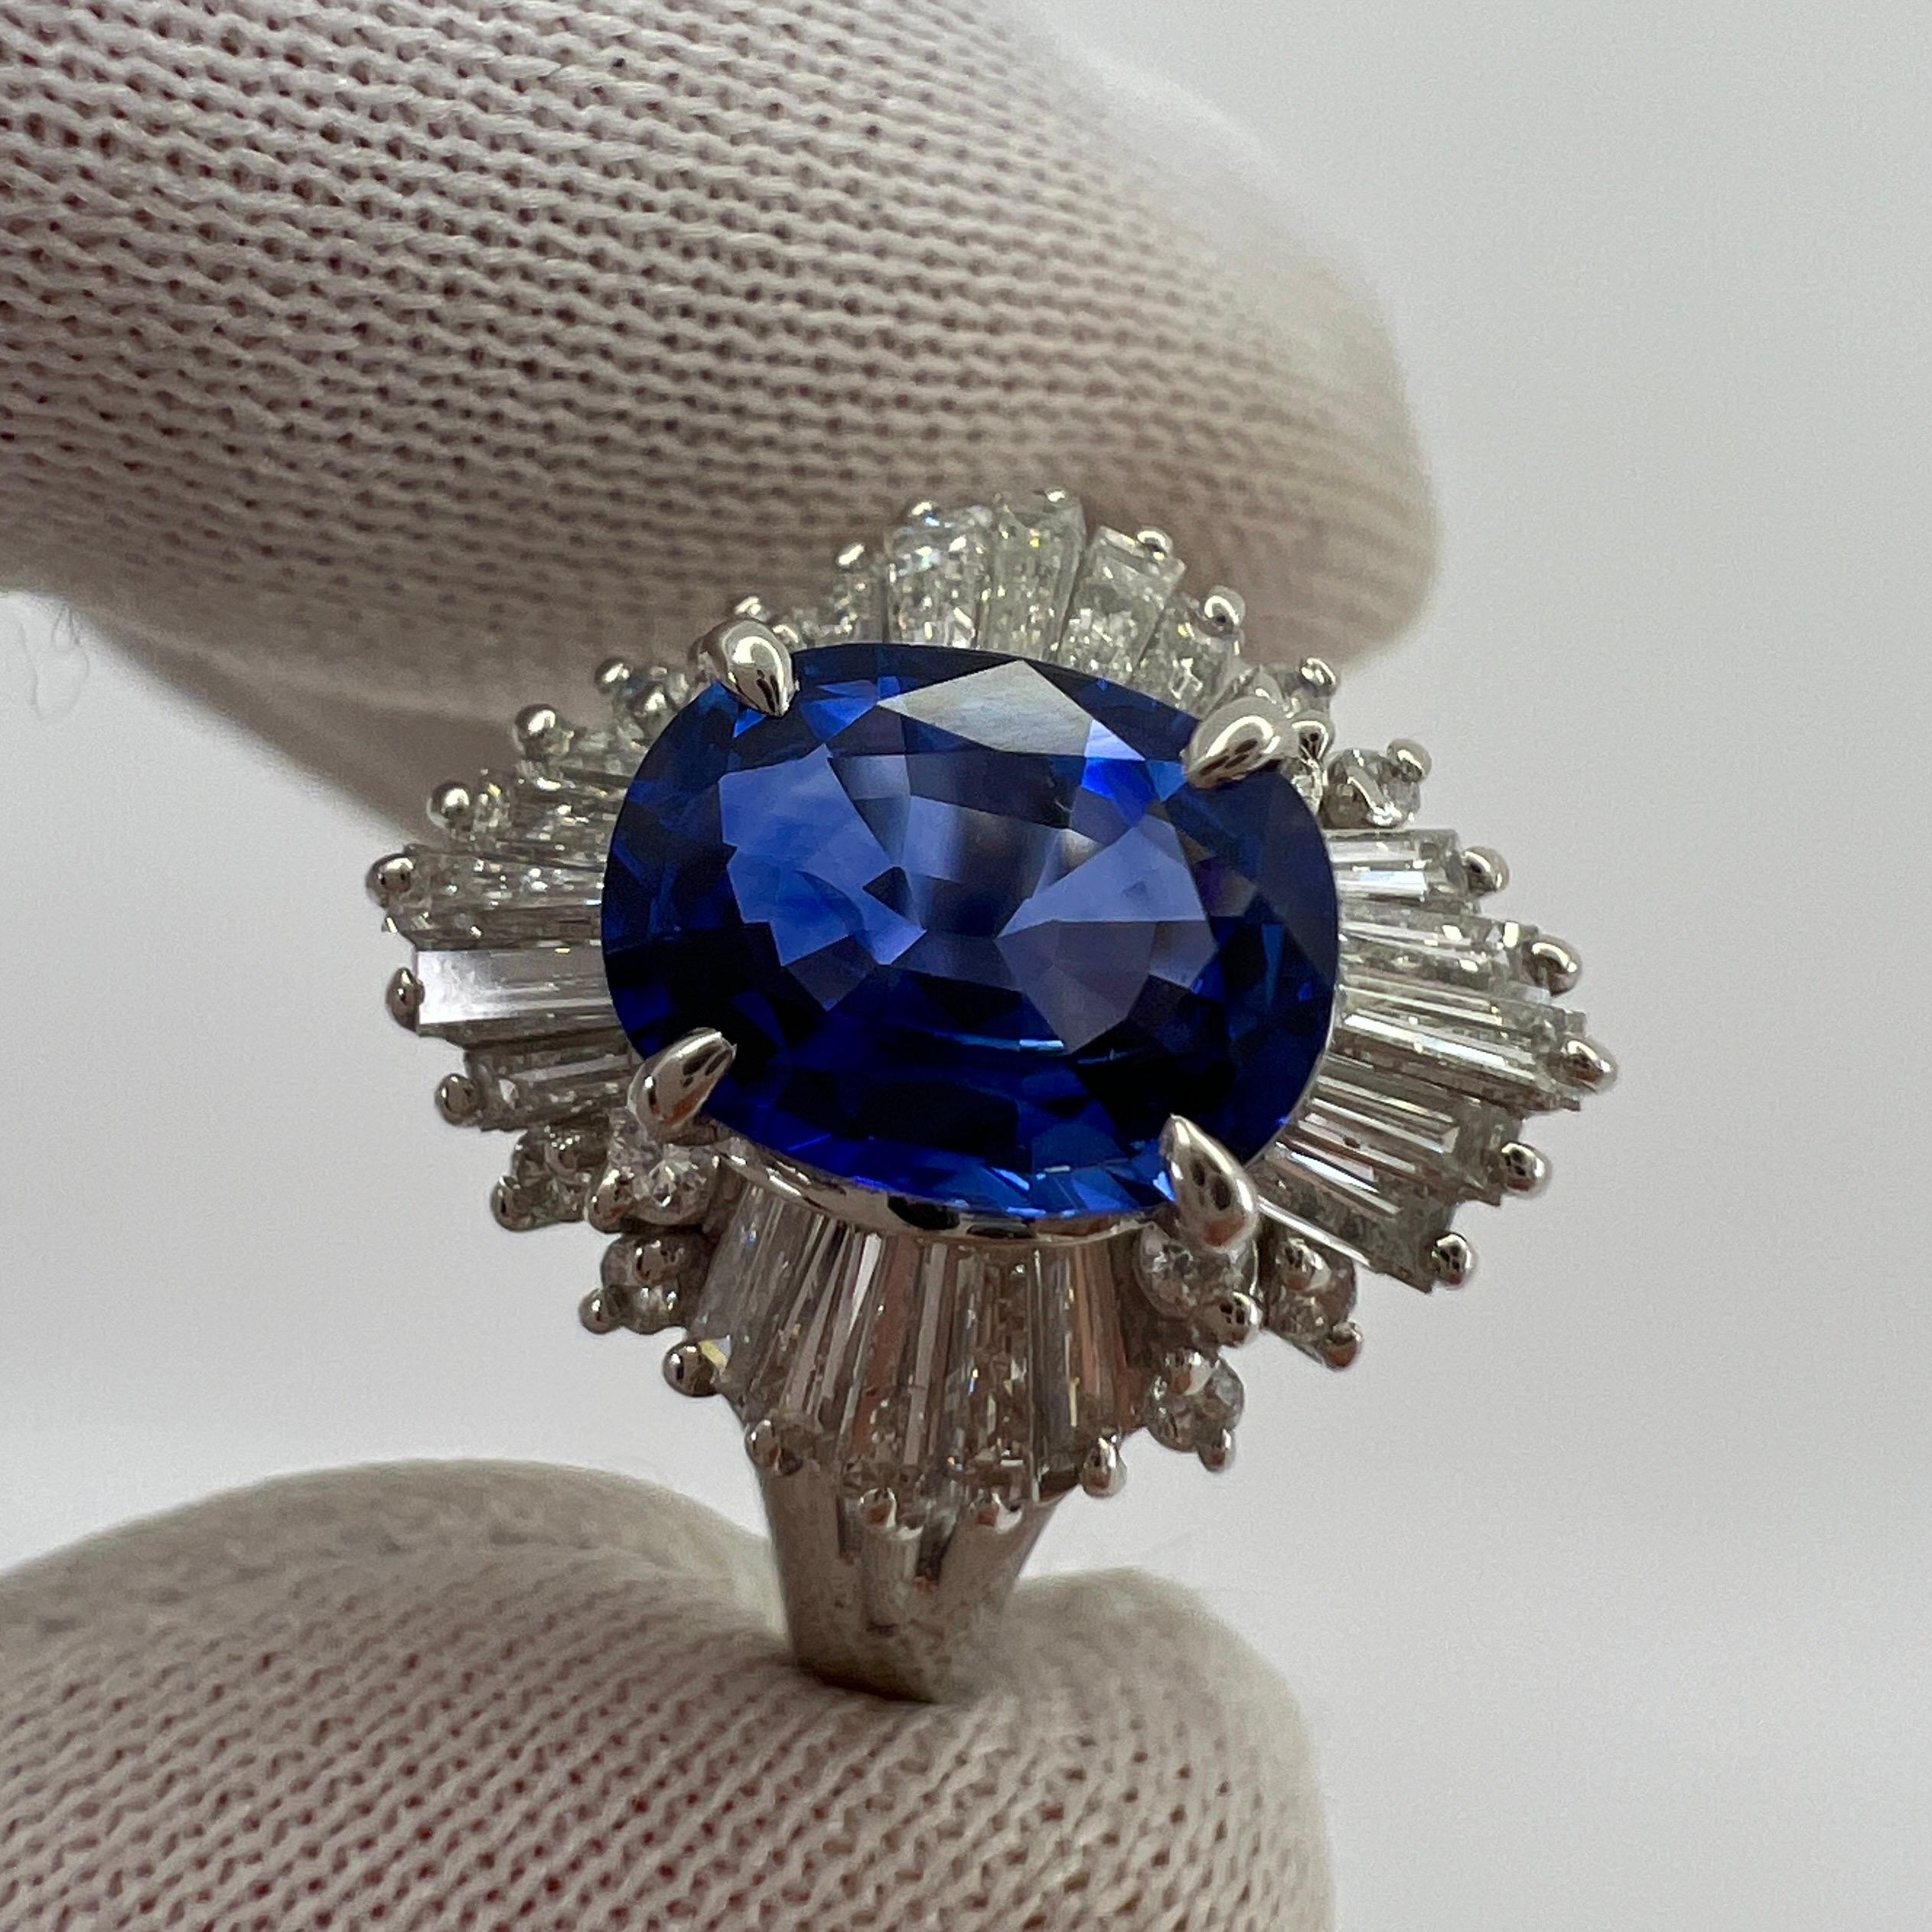 Fine Ceylon Blue Sapphire & Diamond Platinum Cocktail  Ballerina Ring.

2.06 Total carat weight. 1.32 Carat Ceylon sapphire with a stunning vivid blue colour and excellent clarity. Very clean stone. Also has a very good oval cut.
Accented by 0.74ct